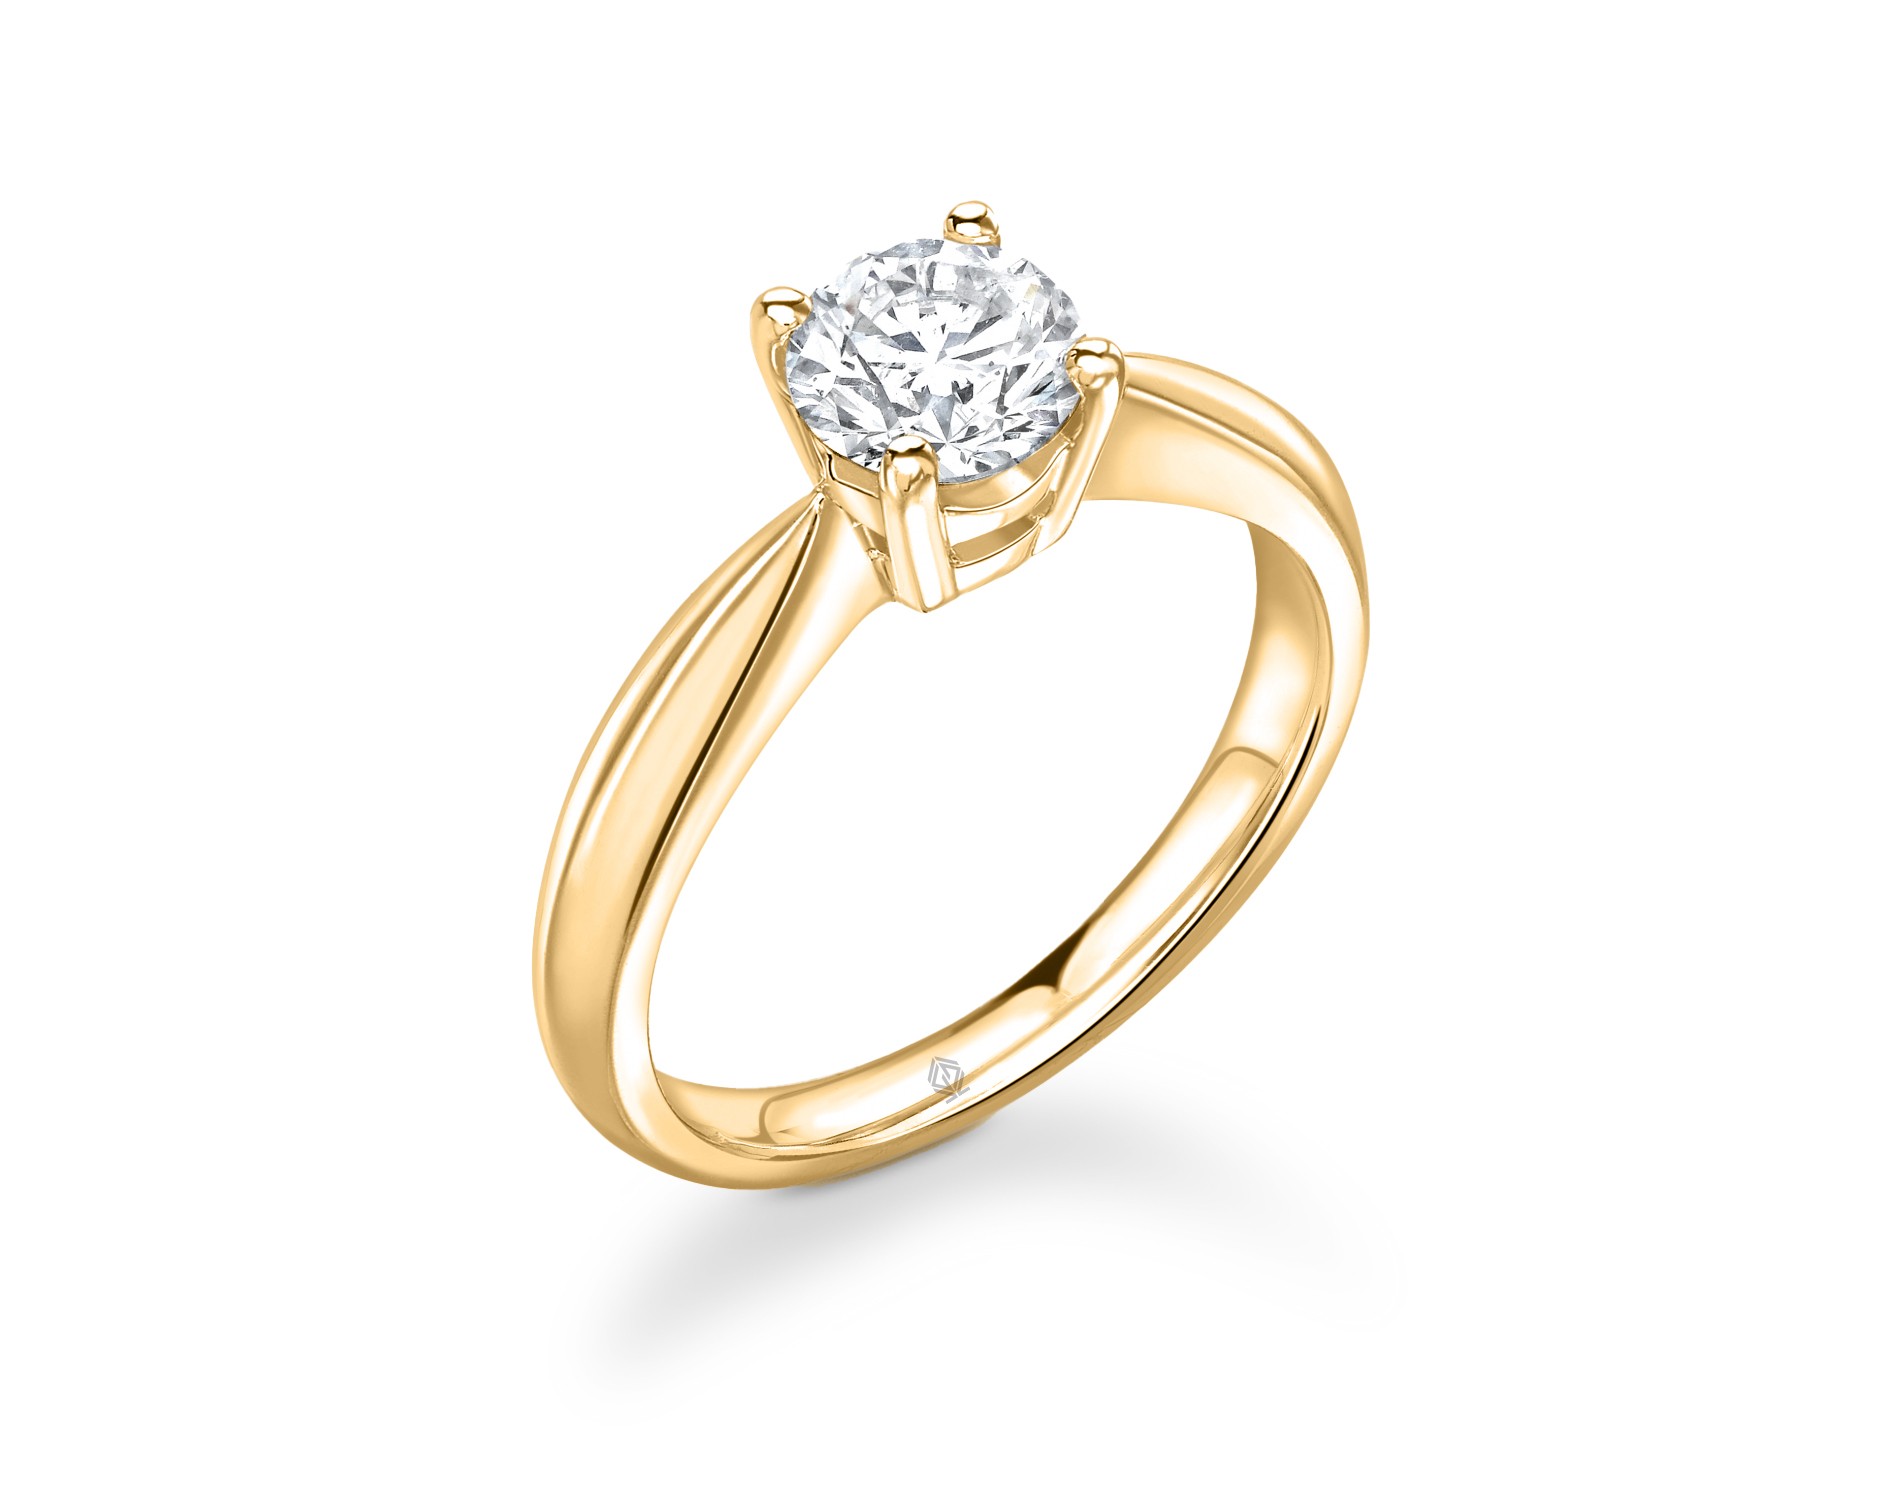 18K YELLOW GOLD 4 PRONGS SOLITAIRE ROUND CUT DIAMOND ENGAGEMENT RING